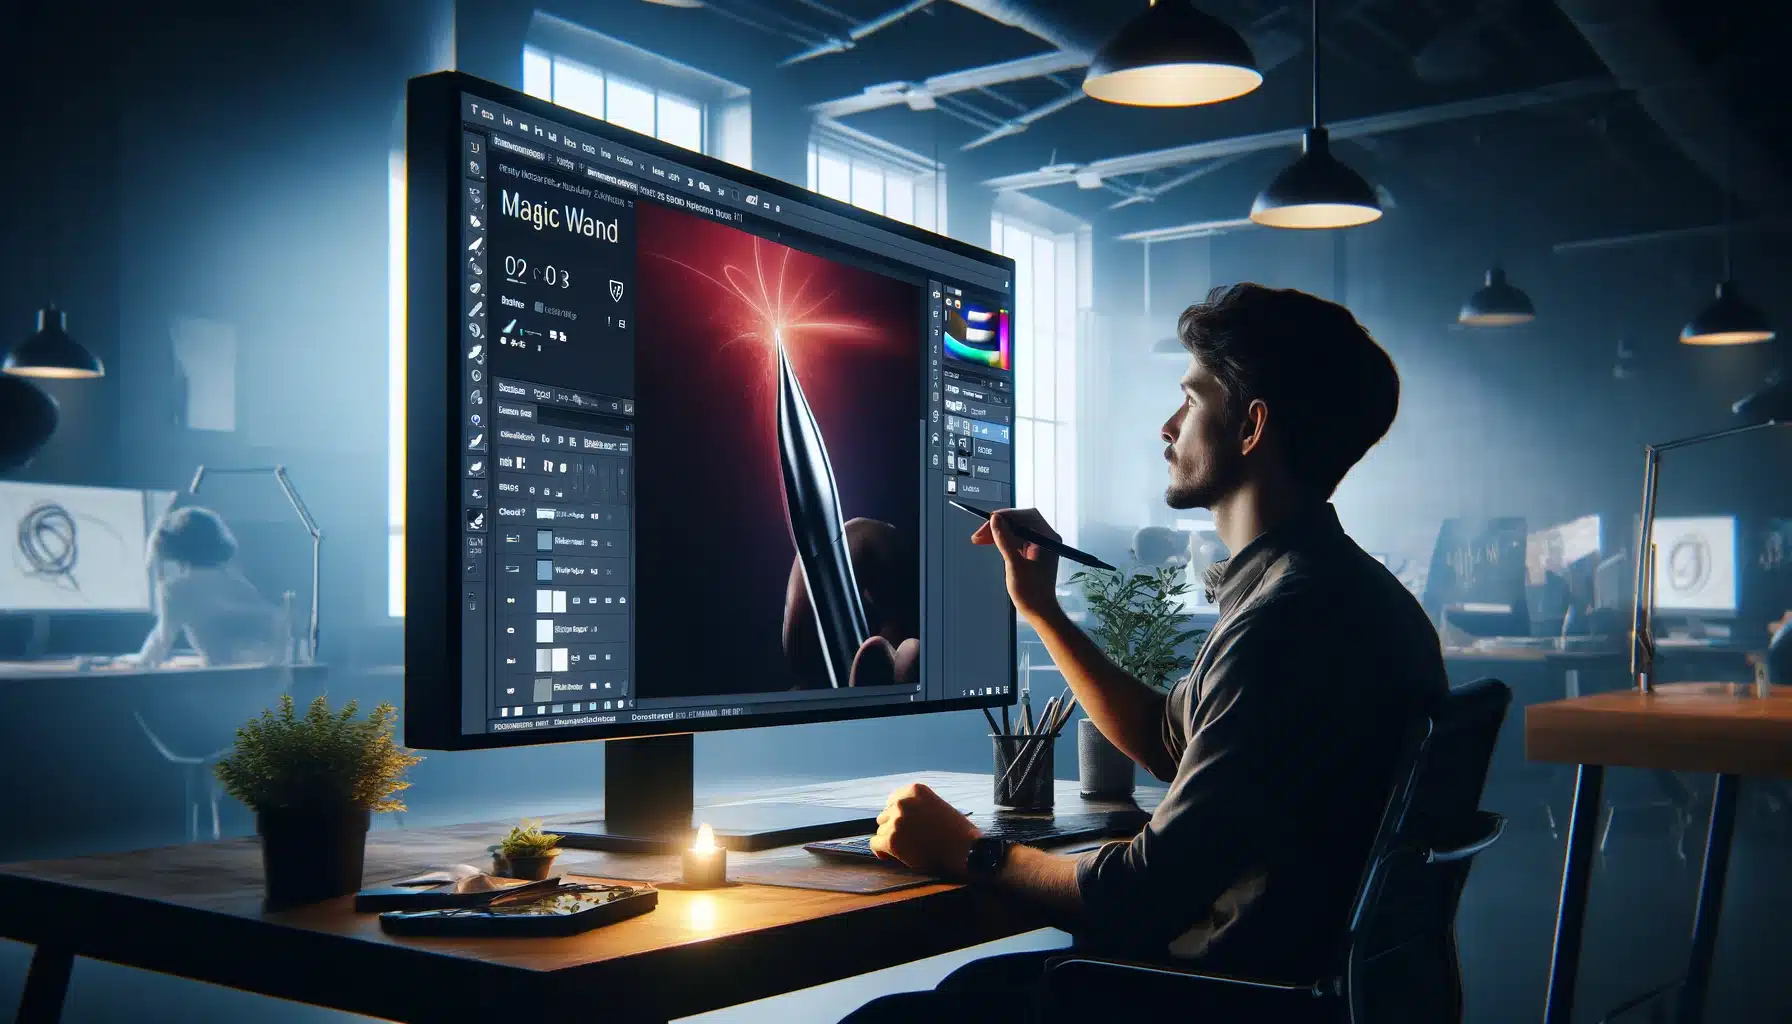 Professional graphic designer using the Magic Wand Tool in Photoshop on a monitor in a modern workspace, showcasing expertise in digital art manipulation.